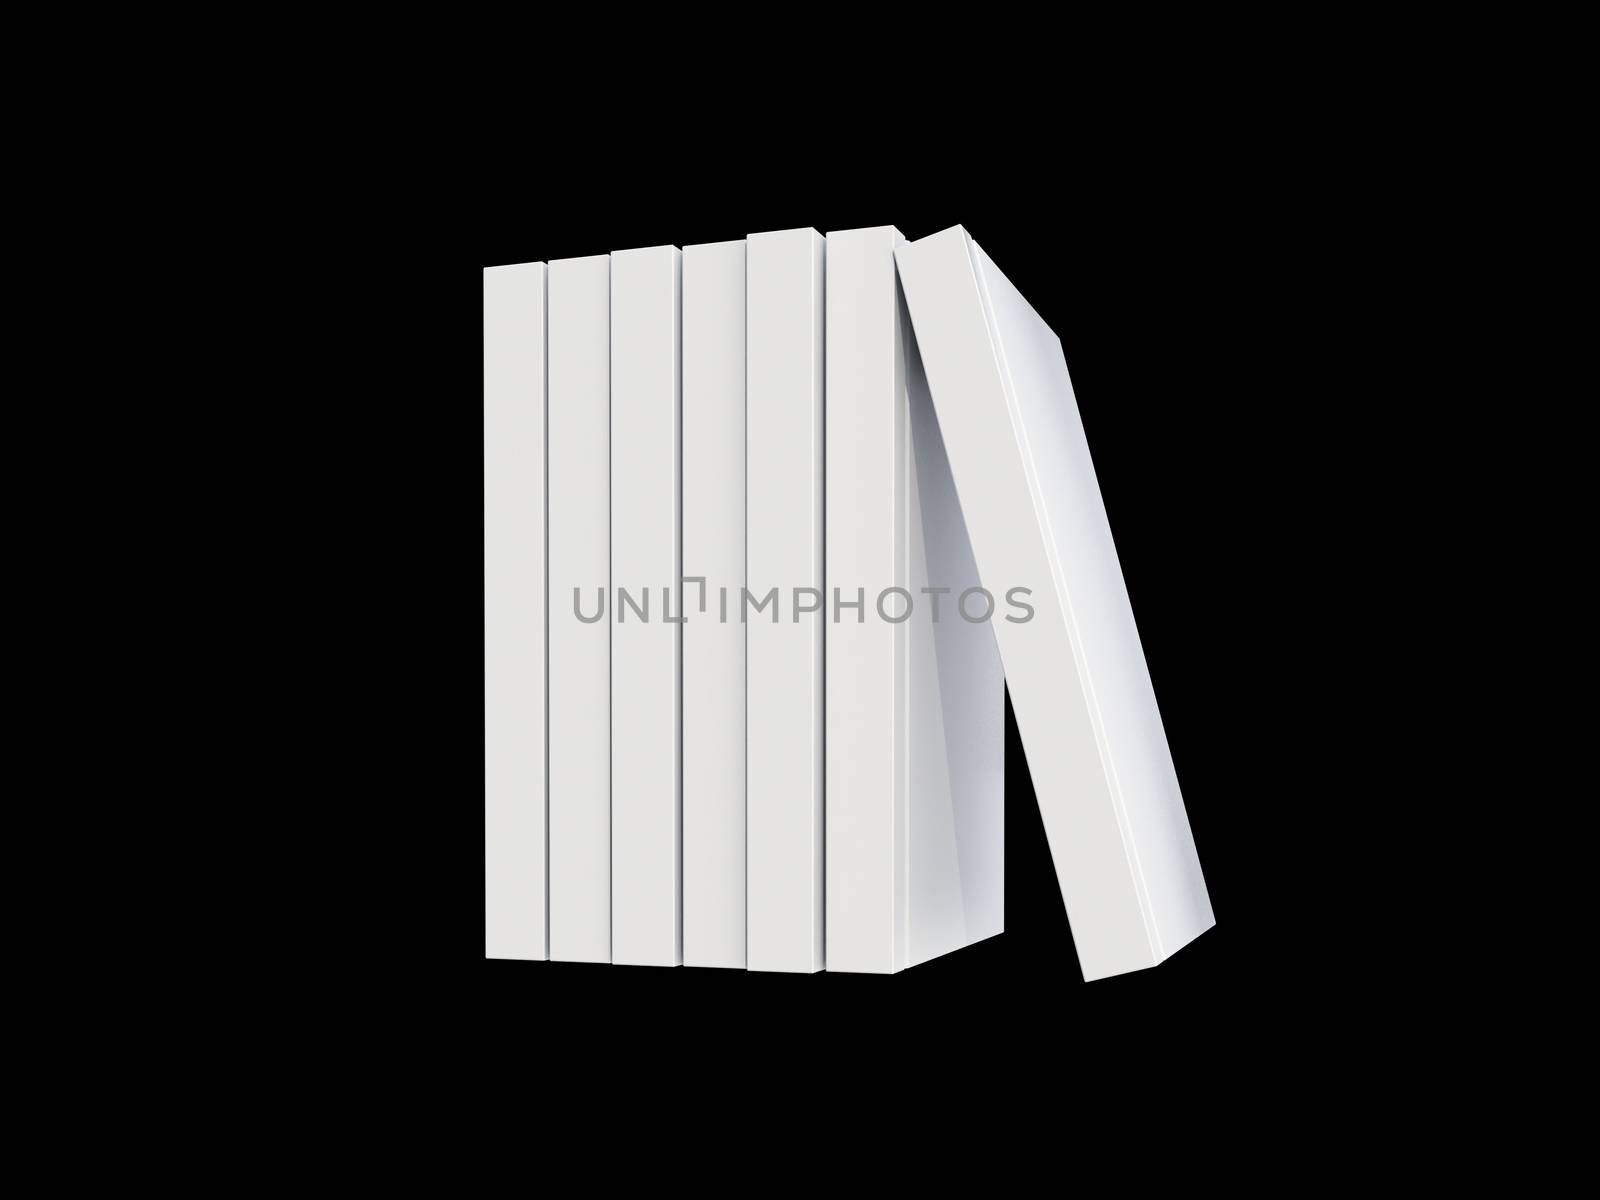 white cover book isolated on black